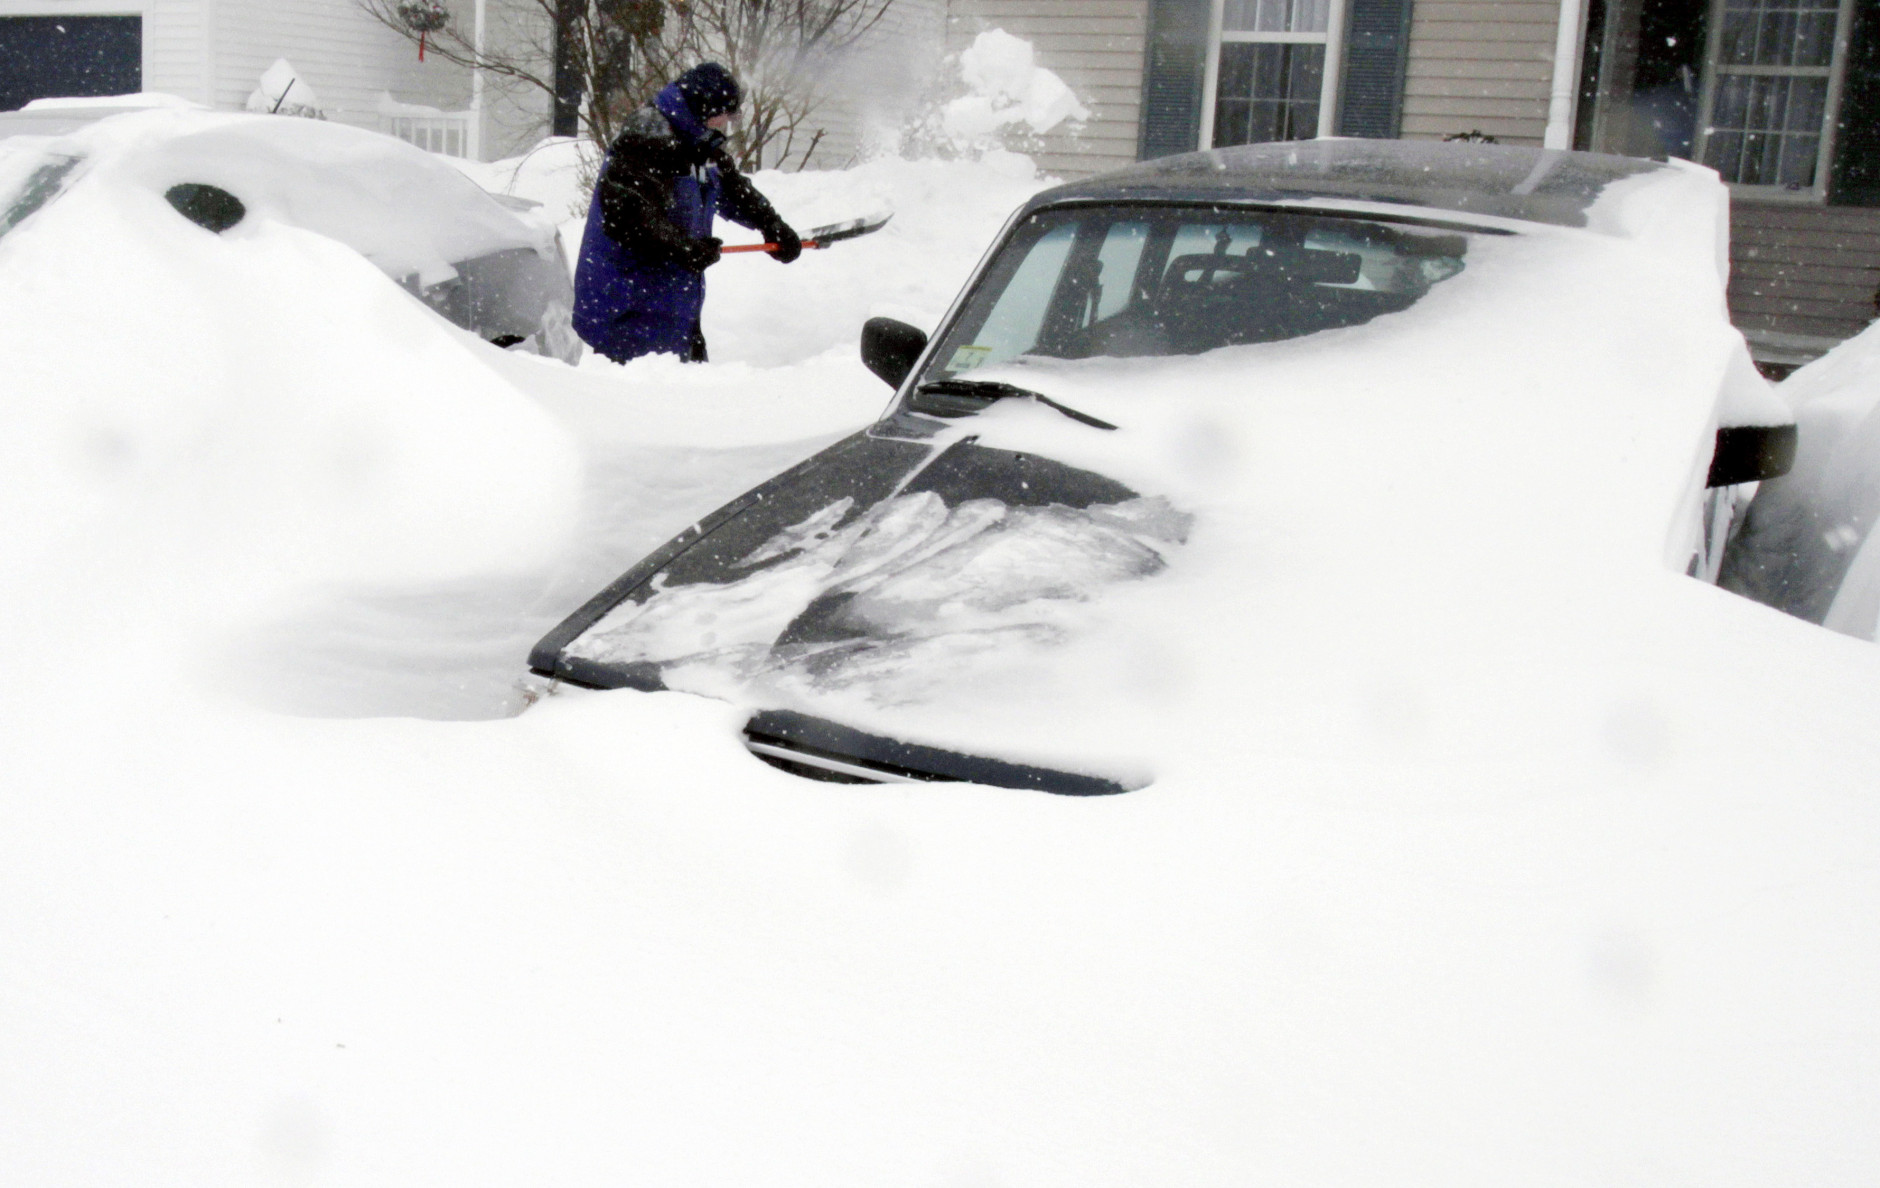 Paul Baxter digs his cars out of drifted snow after a winter storm, Tuesday, Jan. 27, 2015, in Marlborough, Mass. A storm packing blizzard conditions spun up the East Coast early Tuesday, pounding parts of coastal New Jersey northward through Maine with high winds and heavy snow. (AP Photo/Bill Sikes)